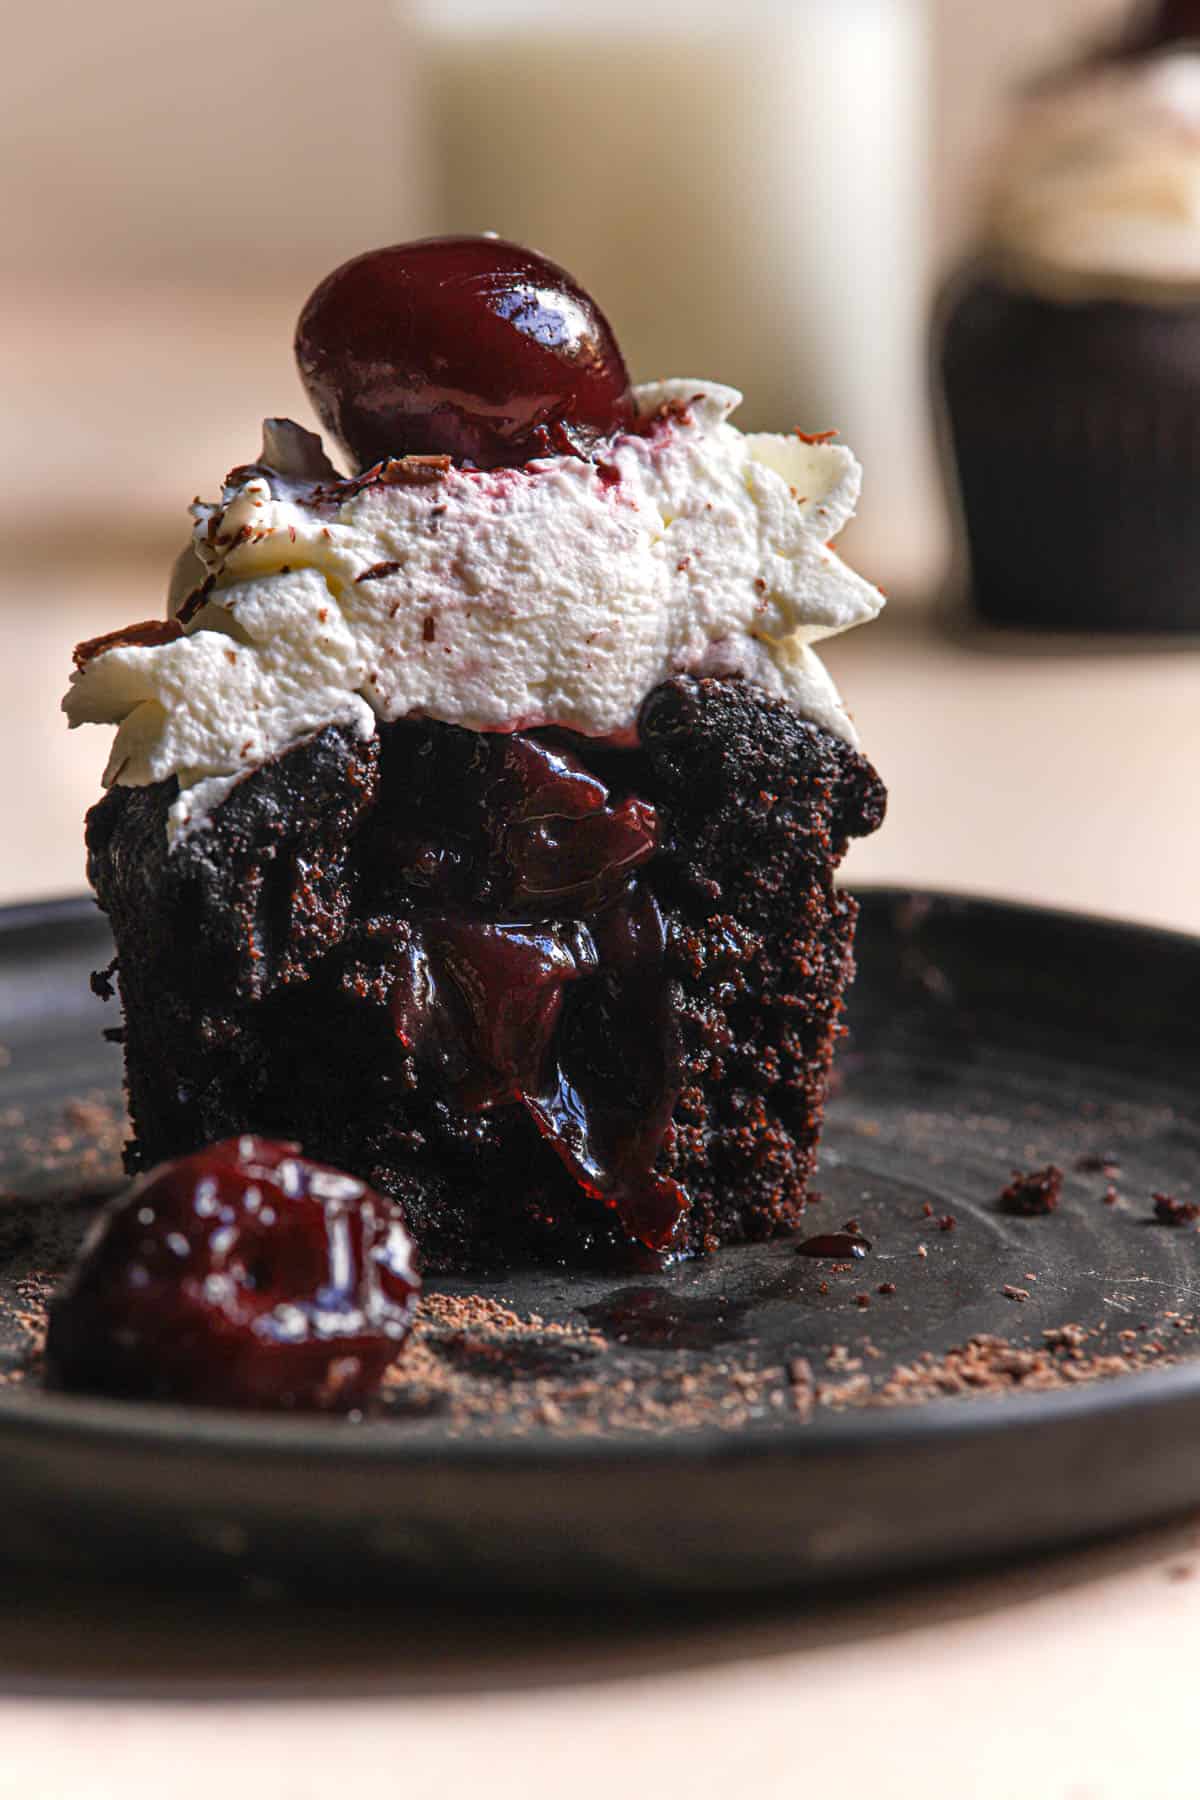 An inside look of a black forest cupcake filled with cherry filling.